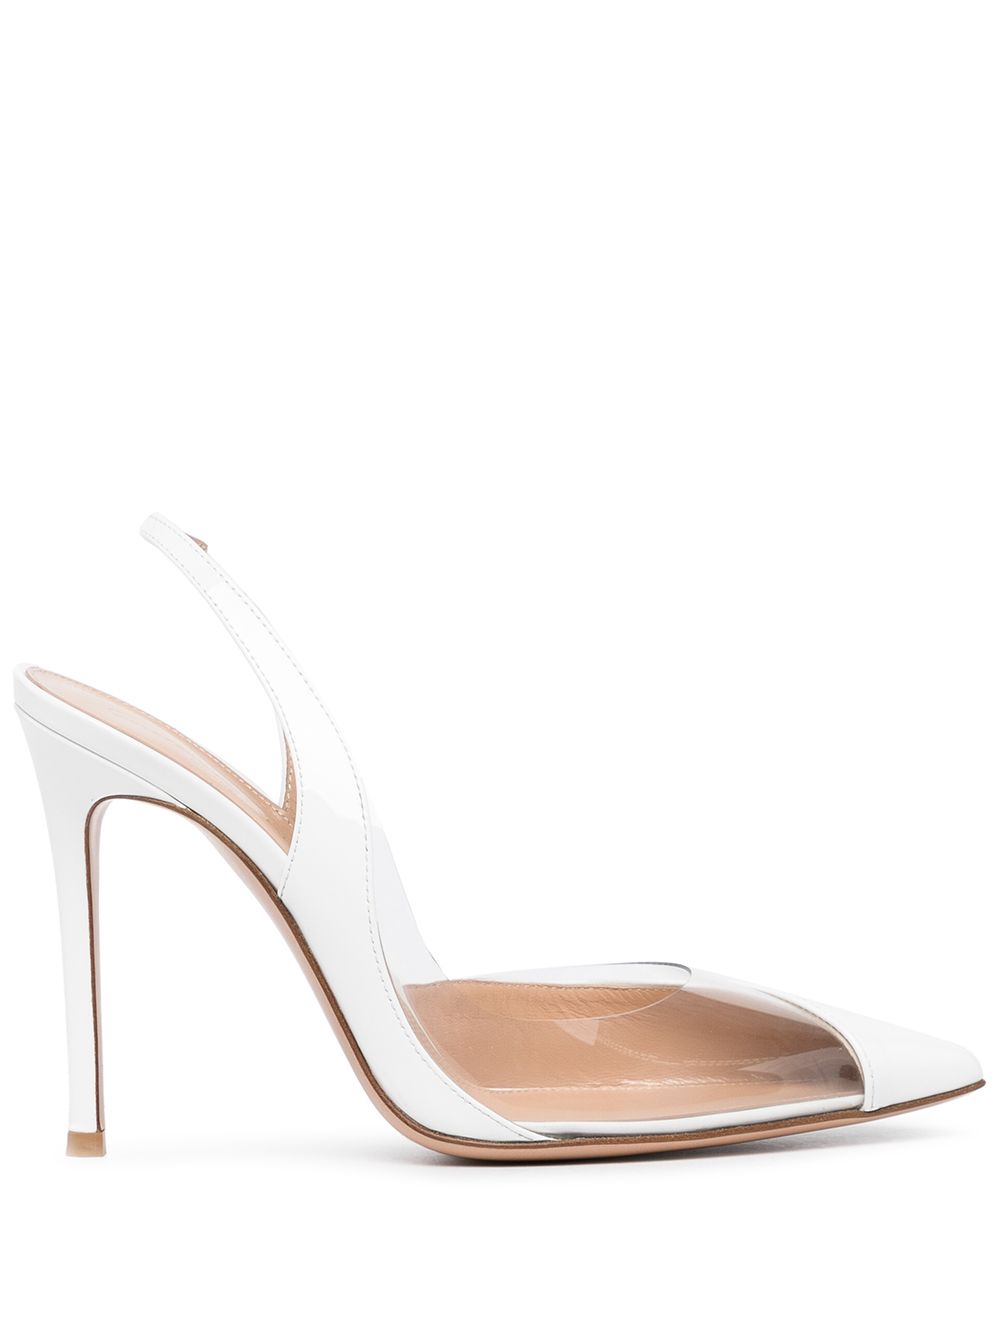 Gianvito Rossi pointed-toe leather pumps